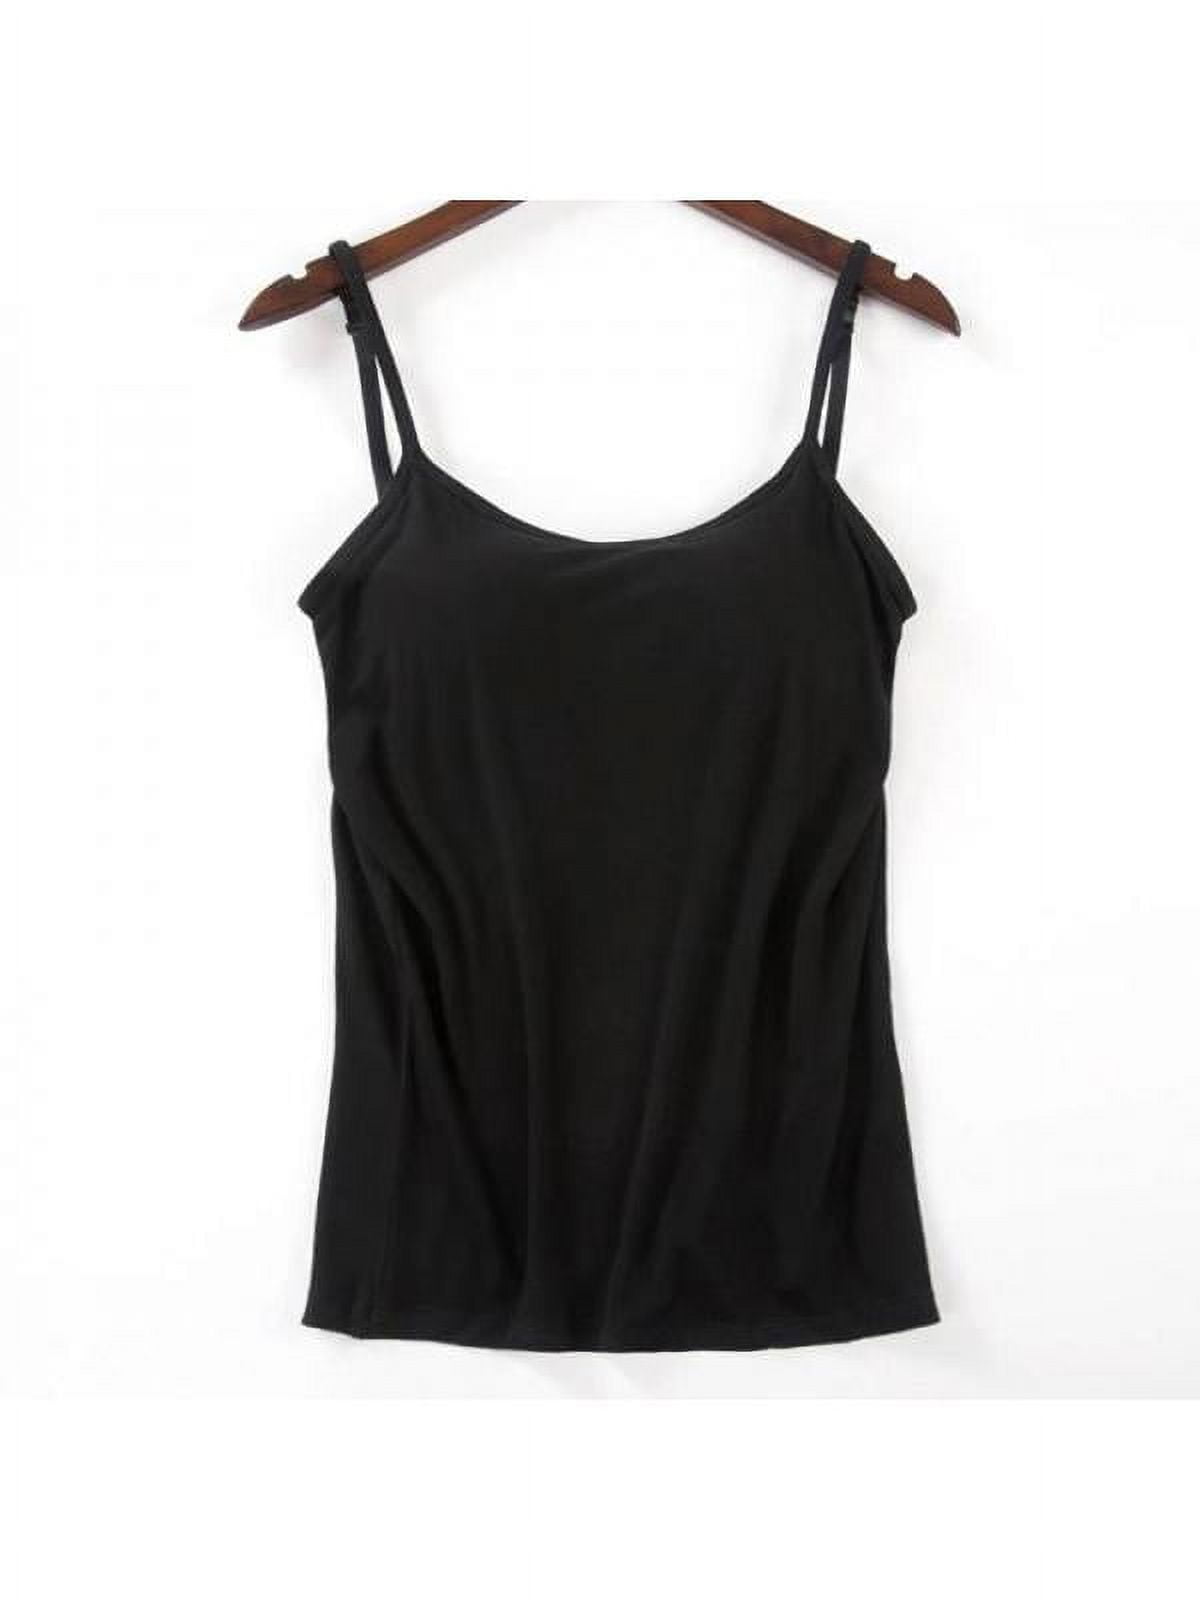 Women's Loose Cami with Built-in Shelf Bra Adjustable Strap